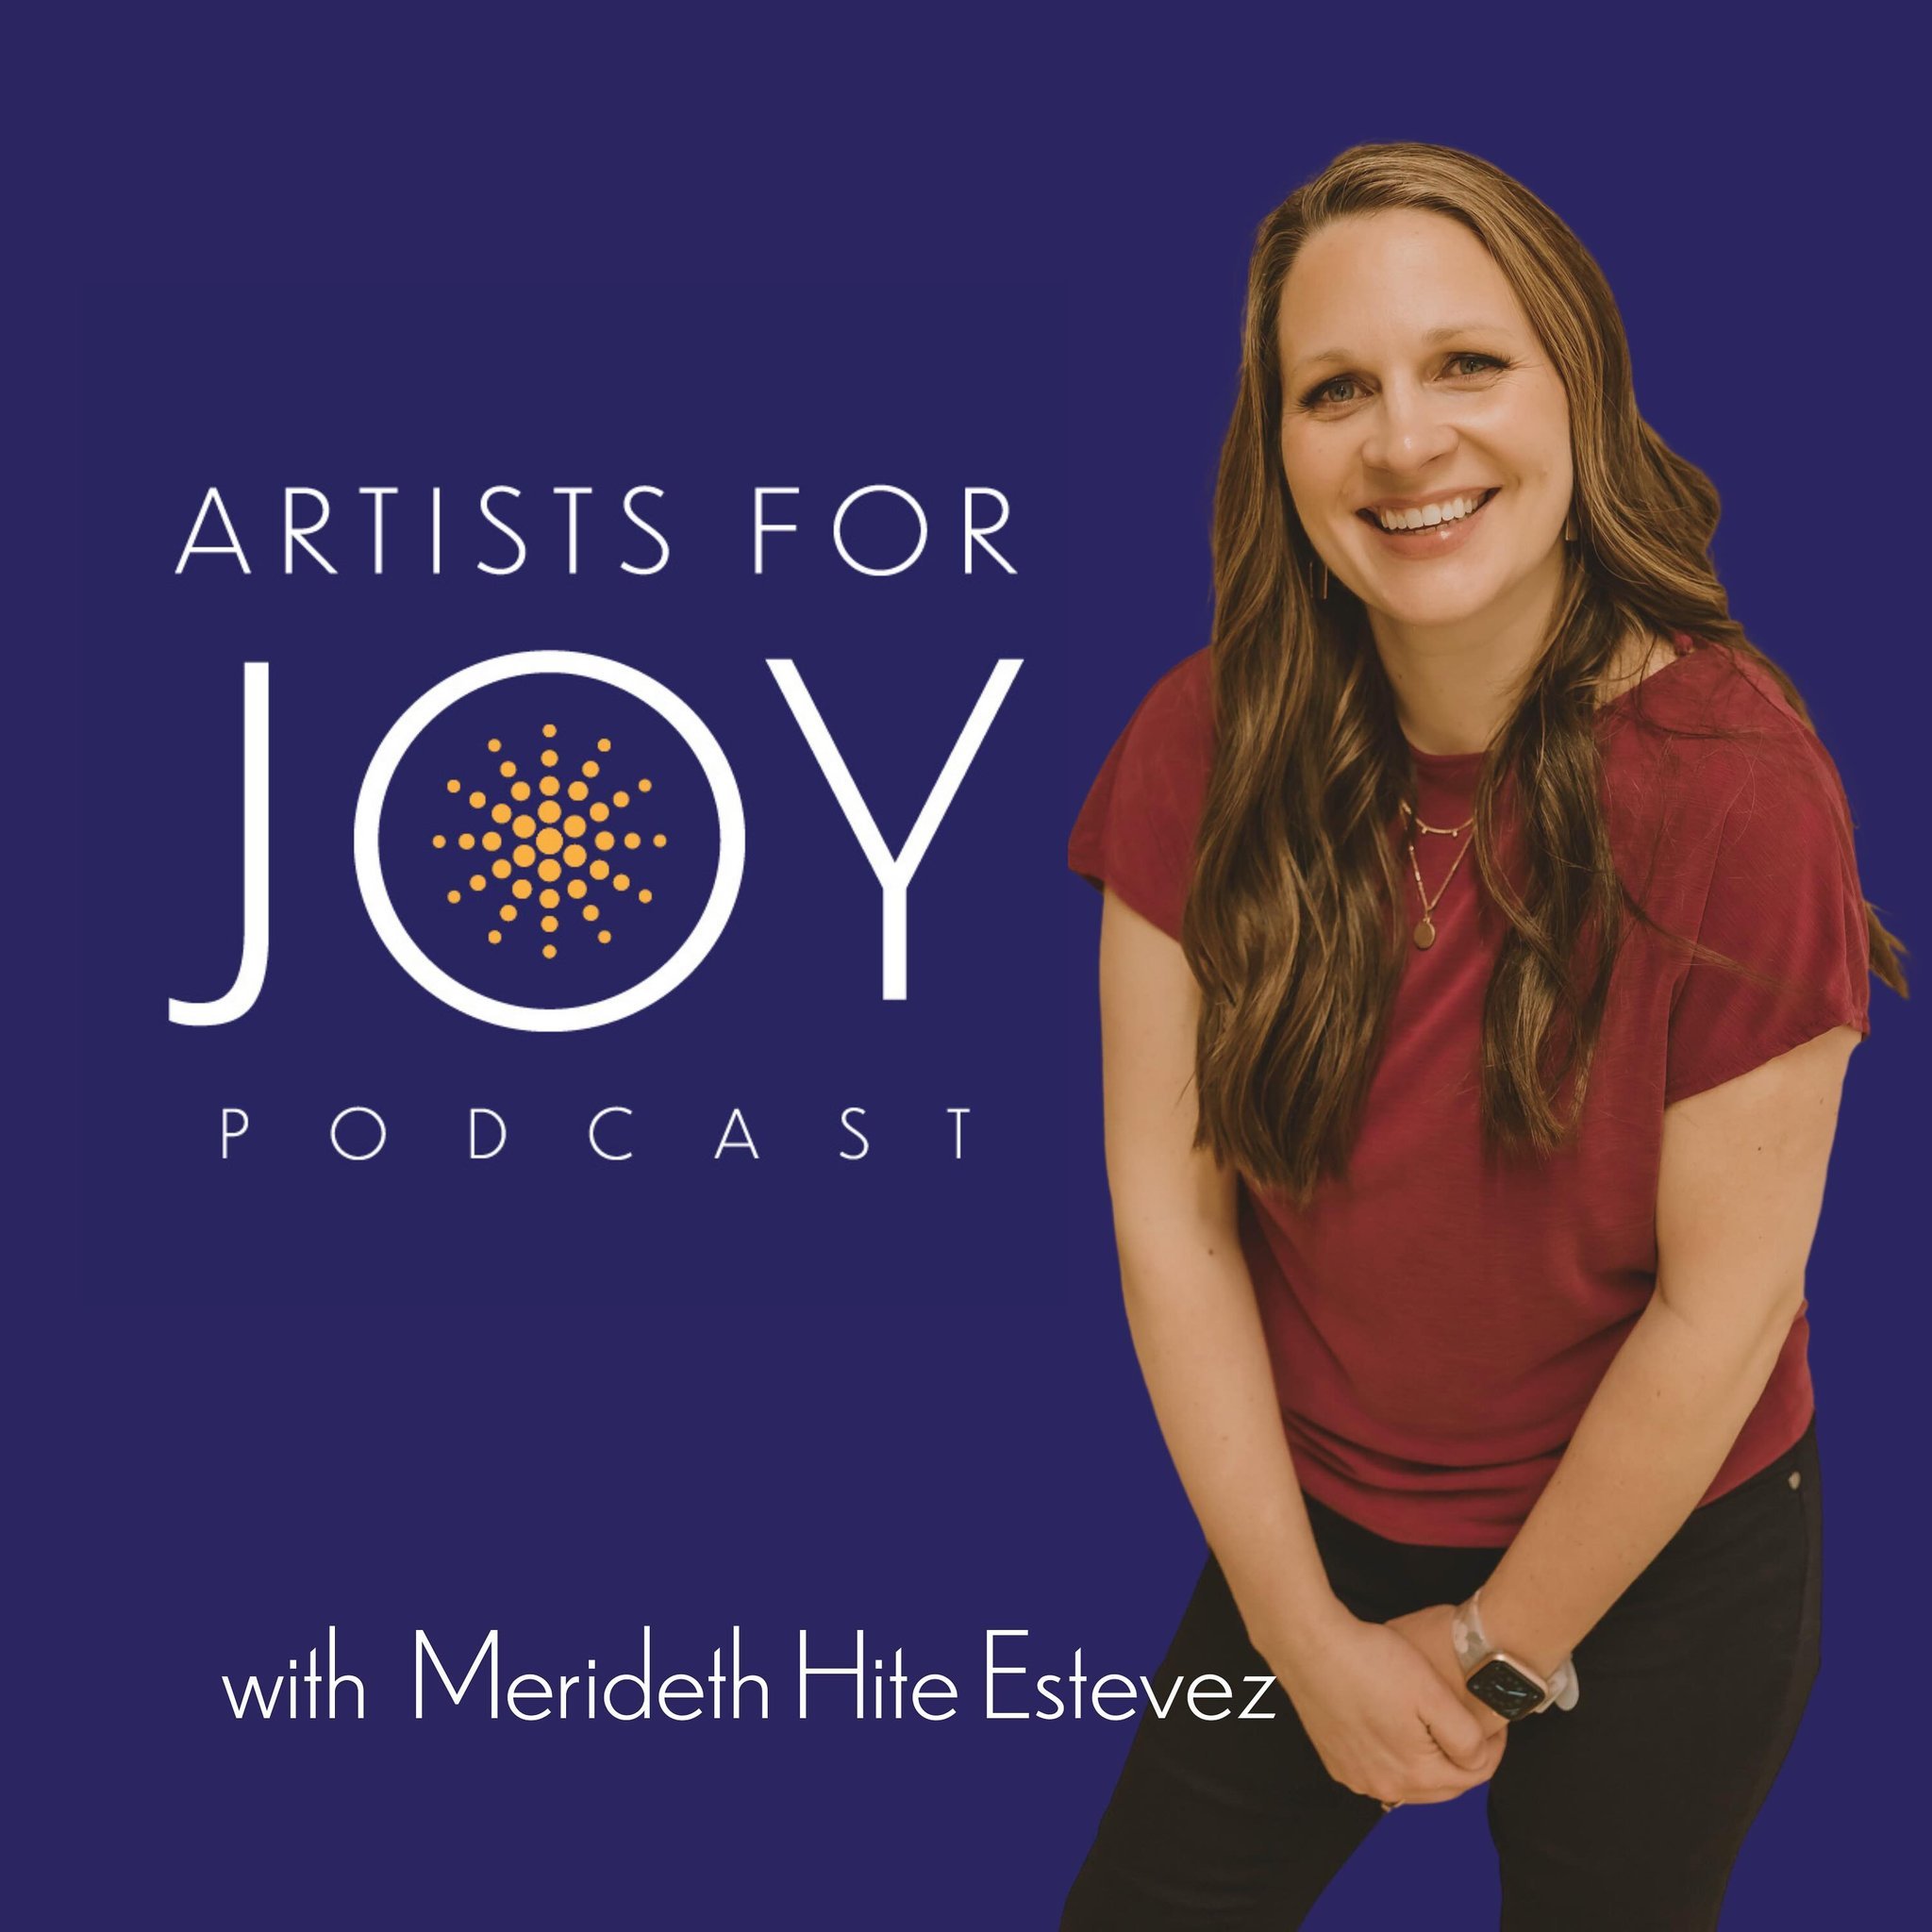 Hi friends!

I&rsquo;m looking for faithful Artists for Joy Podcast listeners who are willing to join me on Zoom at one of the following times for a brainstorming session.

Thursday, April 18th, 3:00-3:45 PM EDT
Friday, April 19th, 12:00-12:45 PM EDT